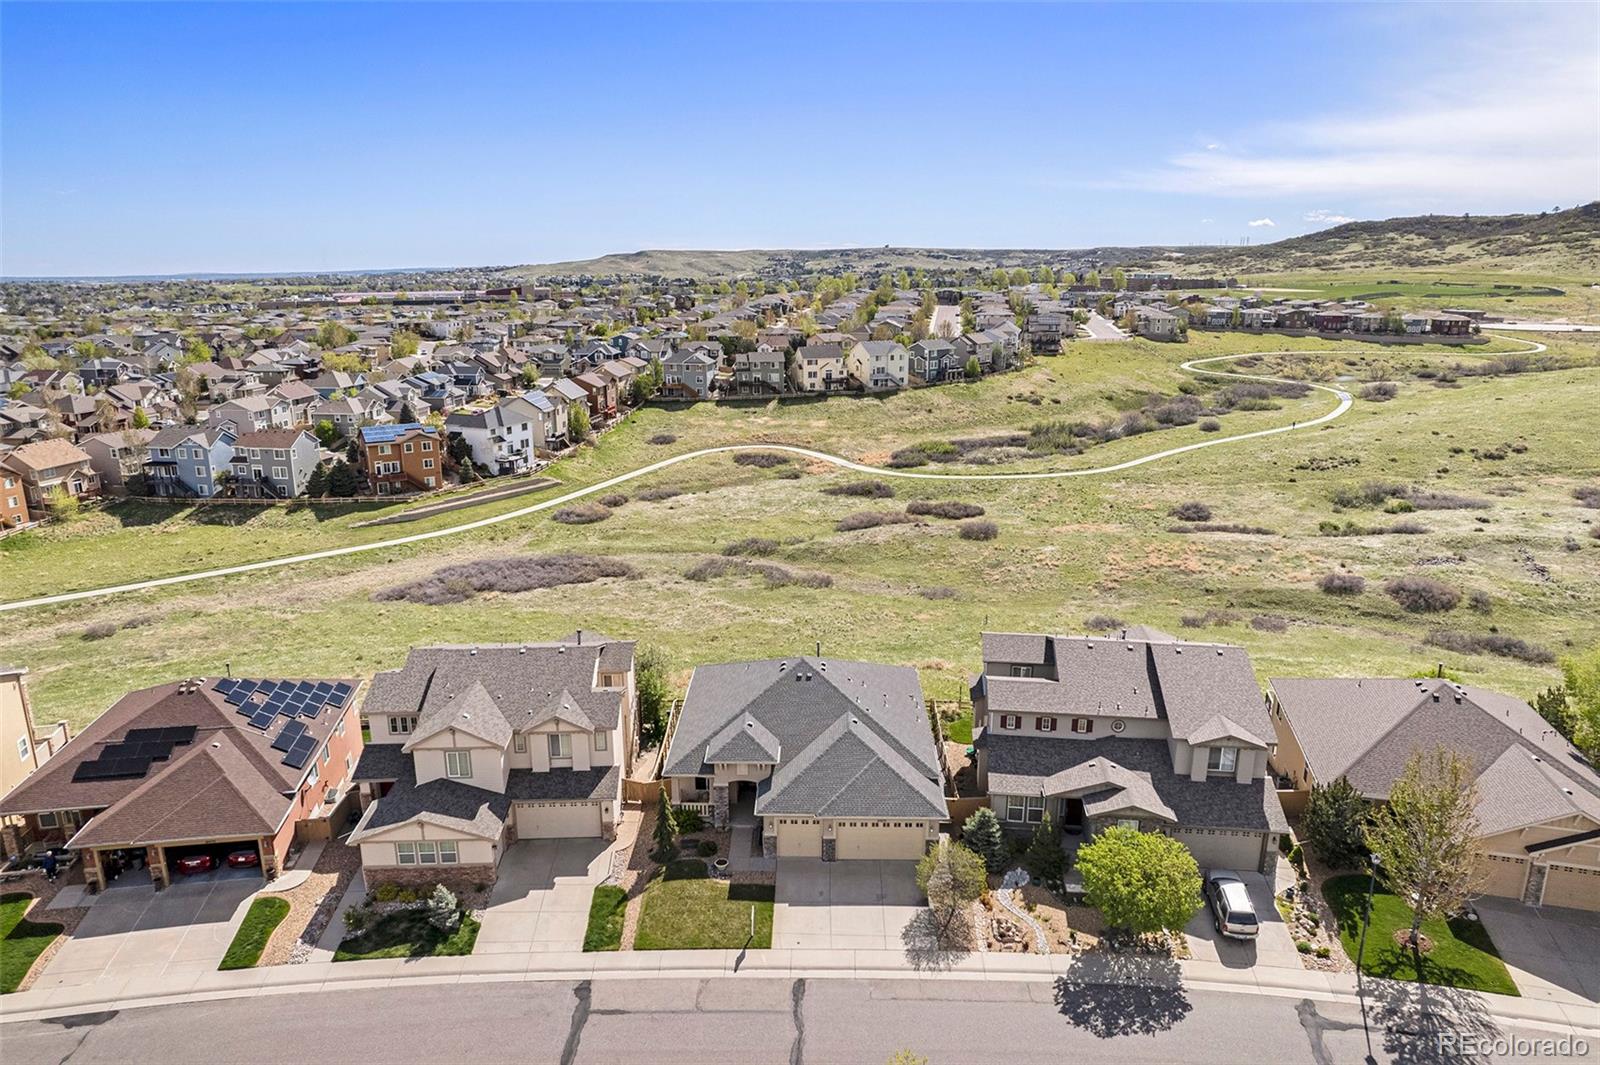 10973  glengate circle, Highlands Ranch sold home. Closed on 2024-05-21 for $1,105,000.